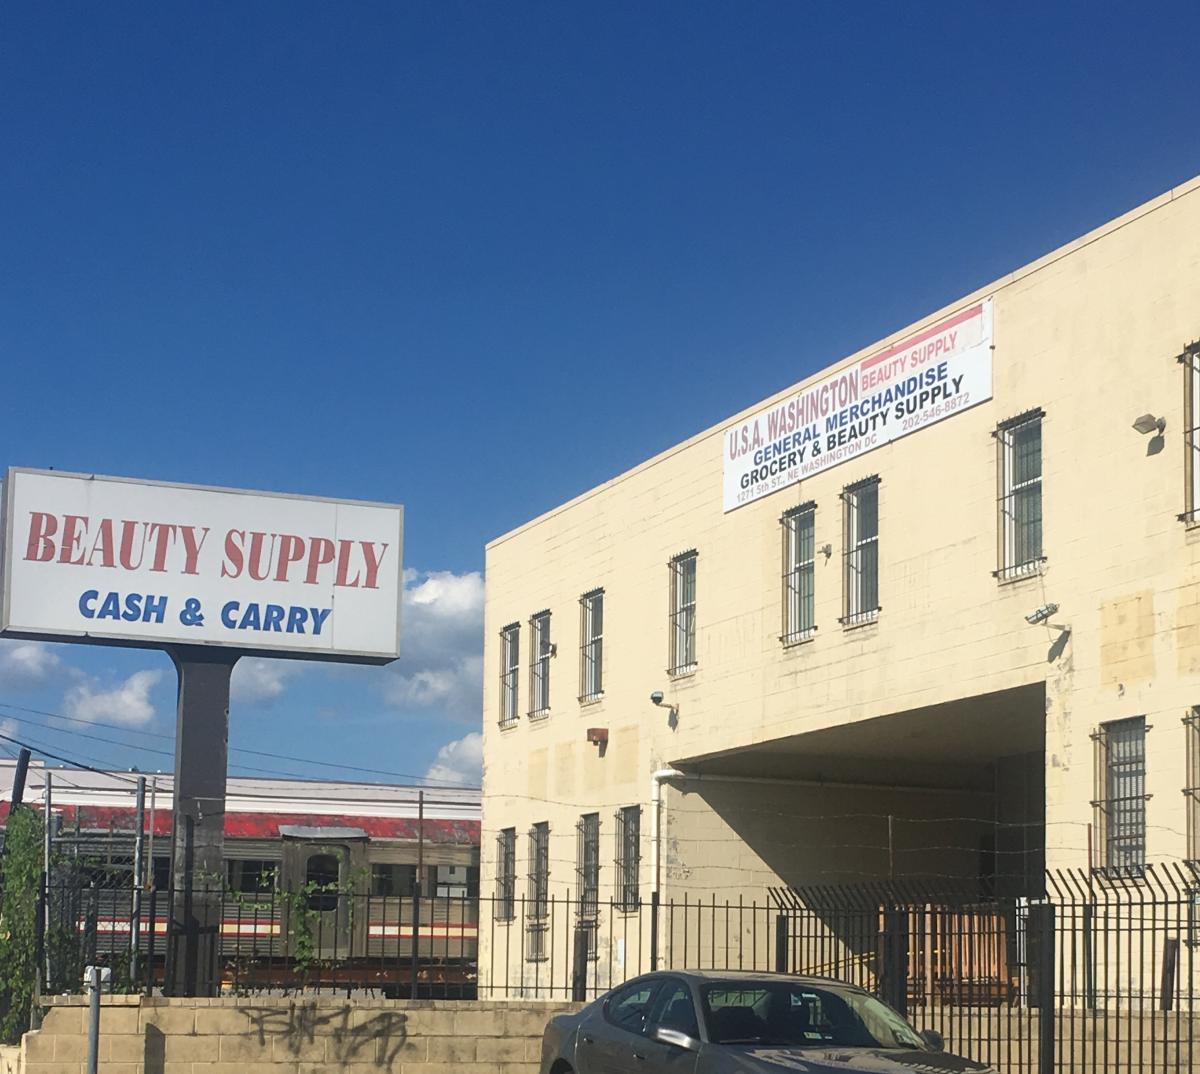 The outside of the beauty supply warehouse